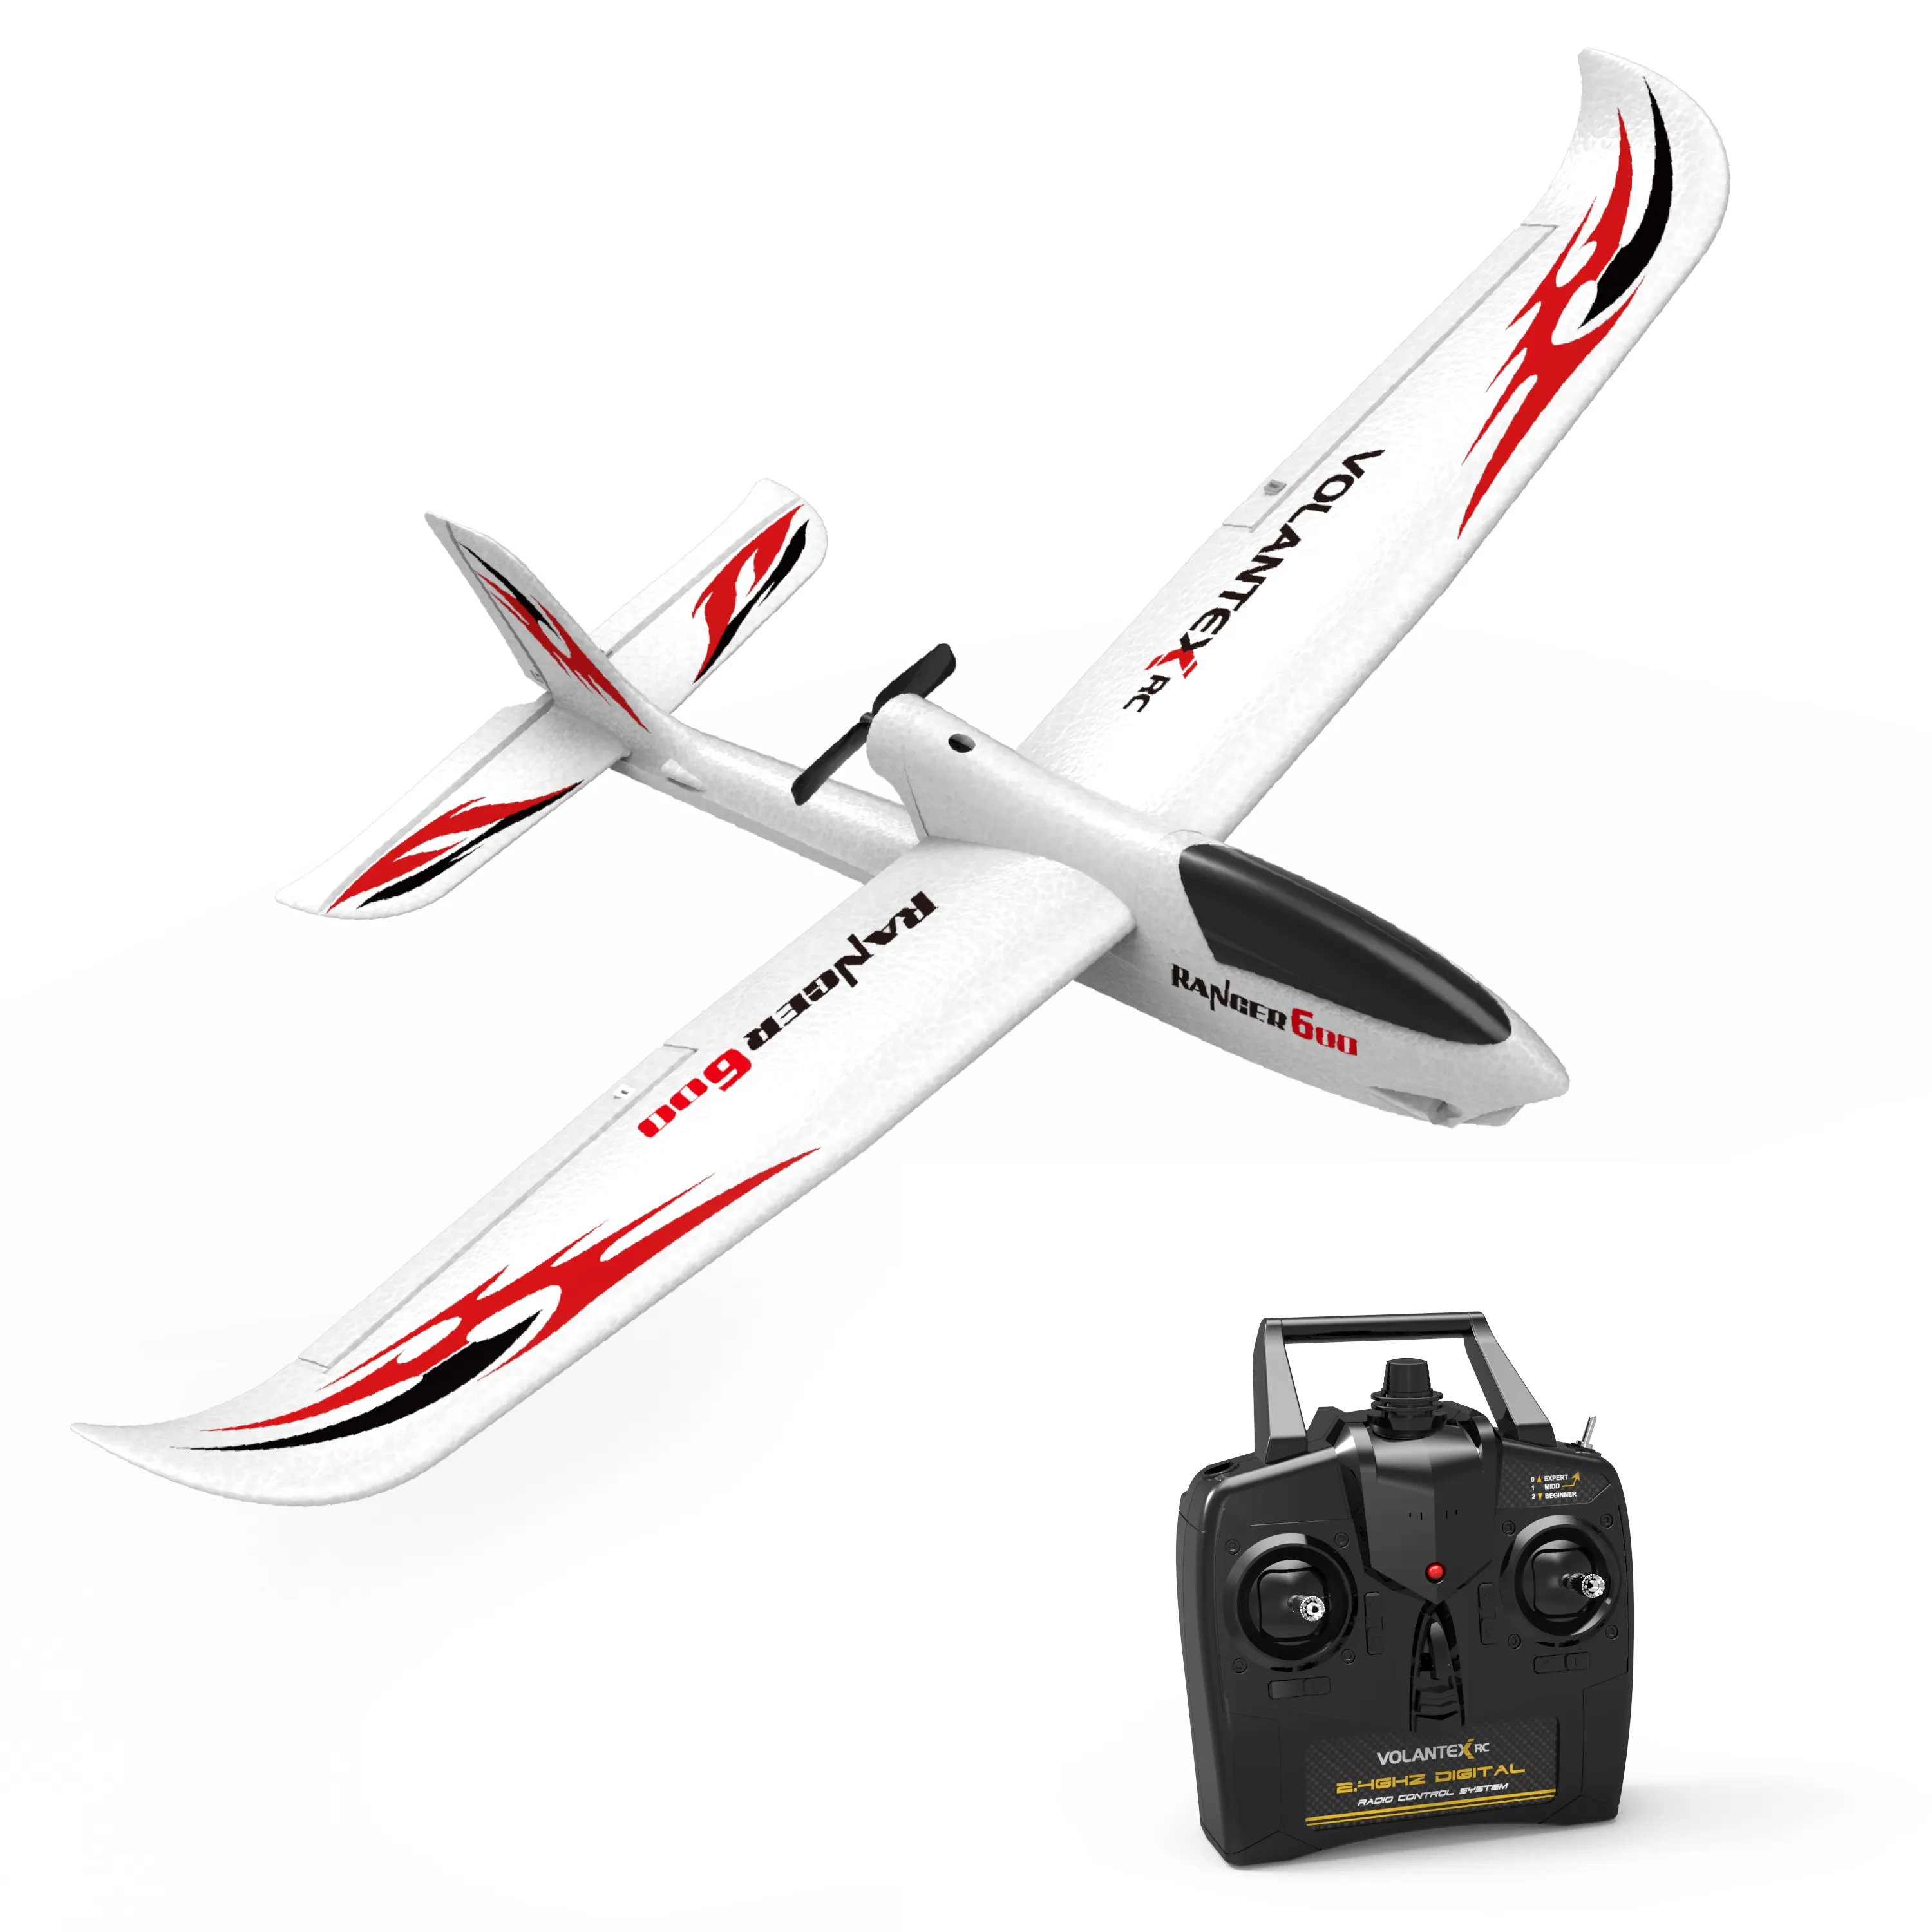 EPP Trainstar 761-2 electric hobbies rc model airplane large rc control plane toy